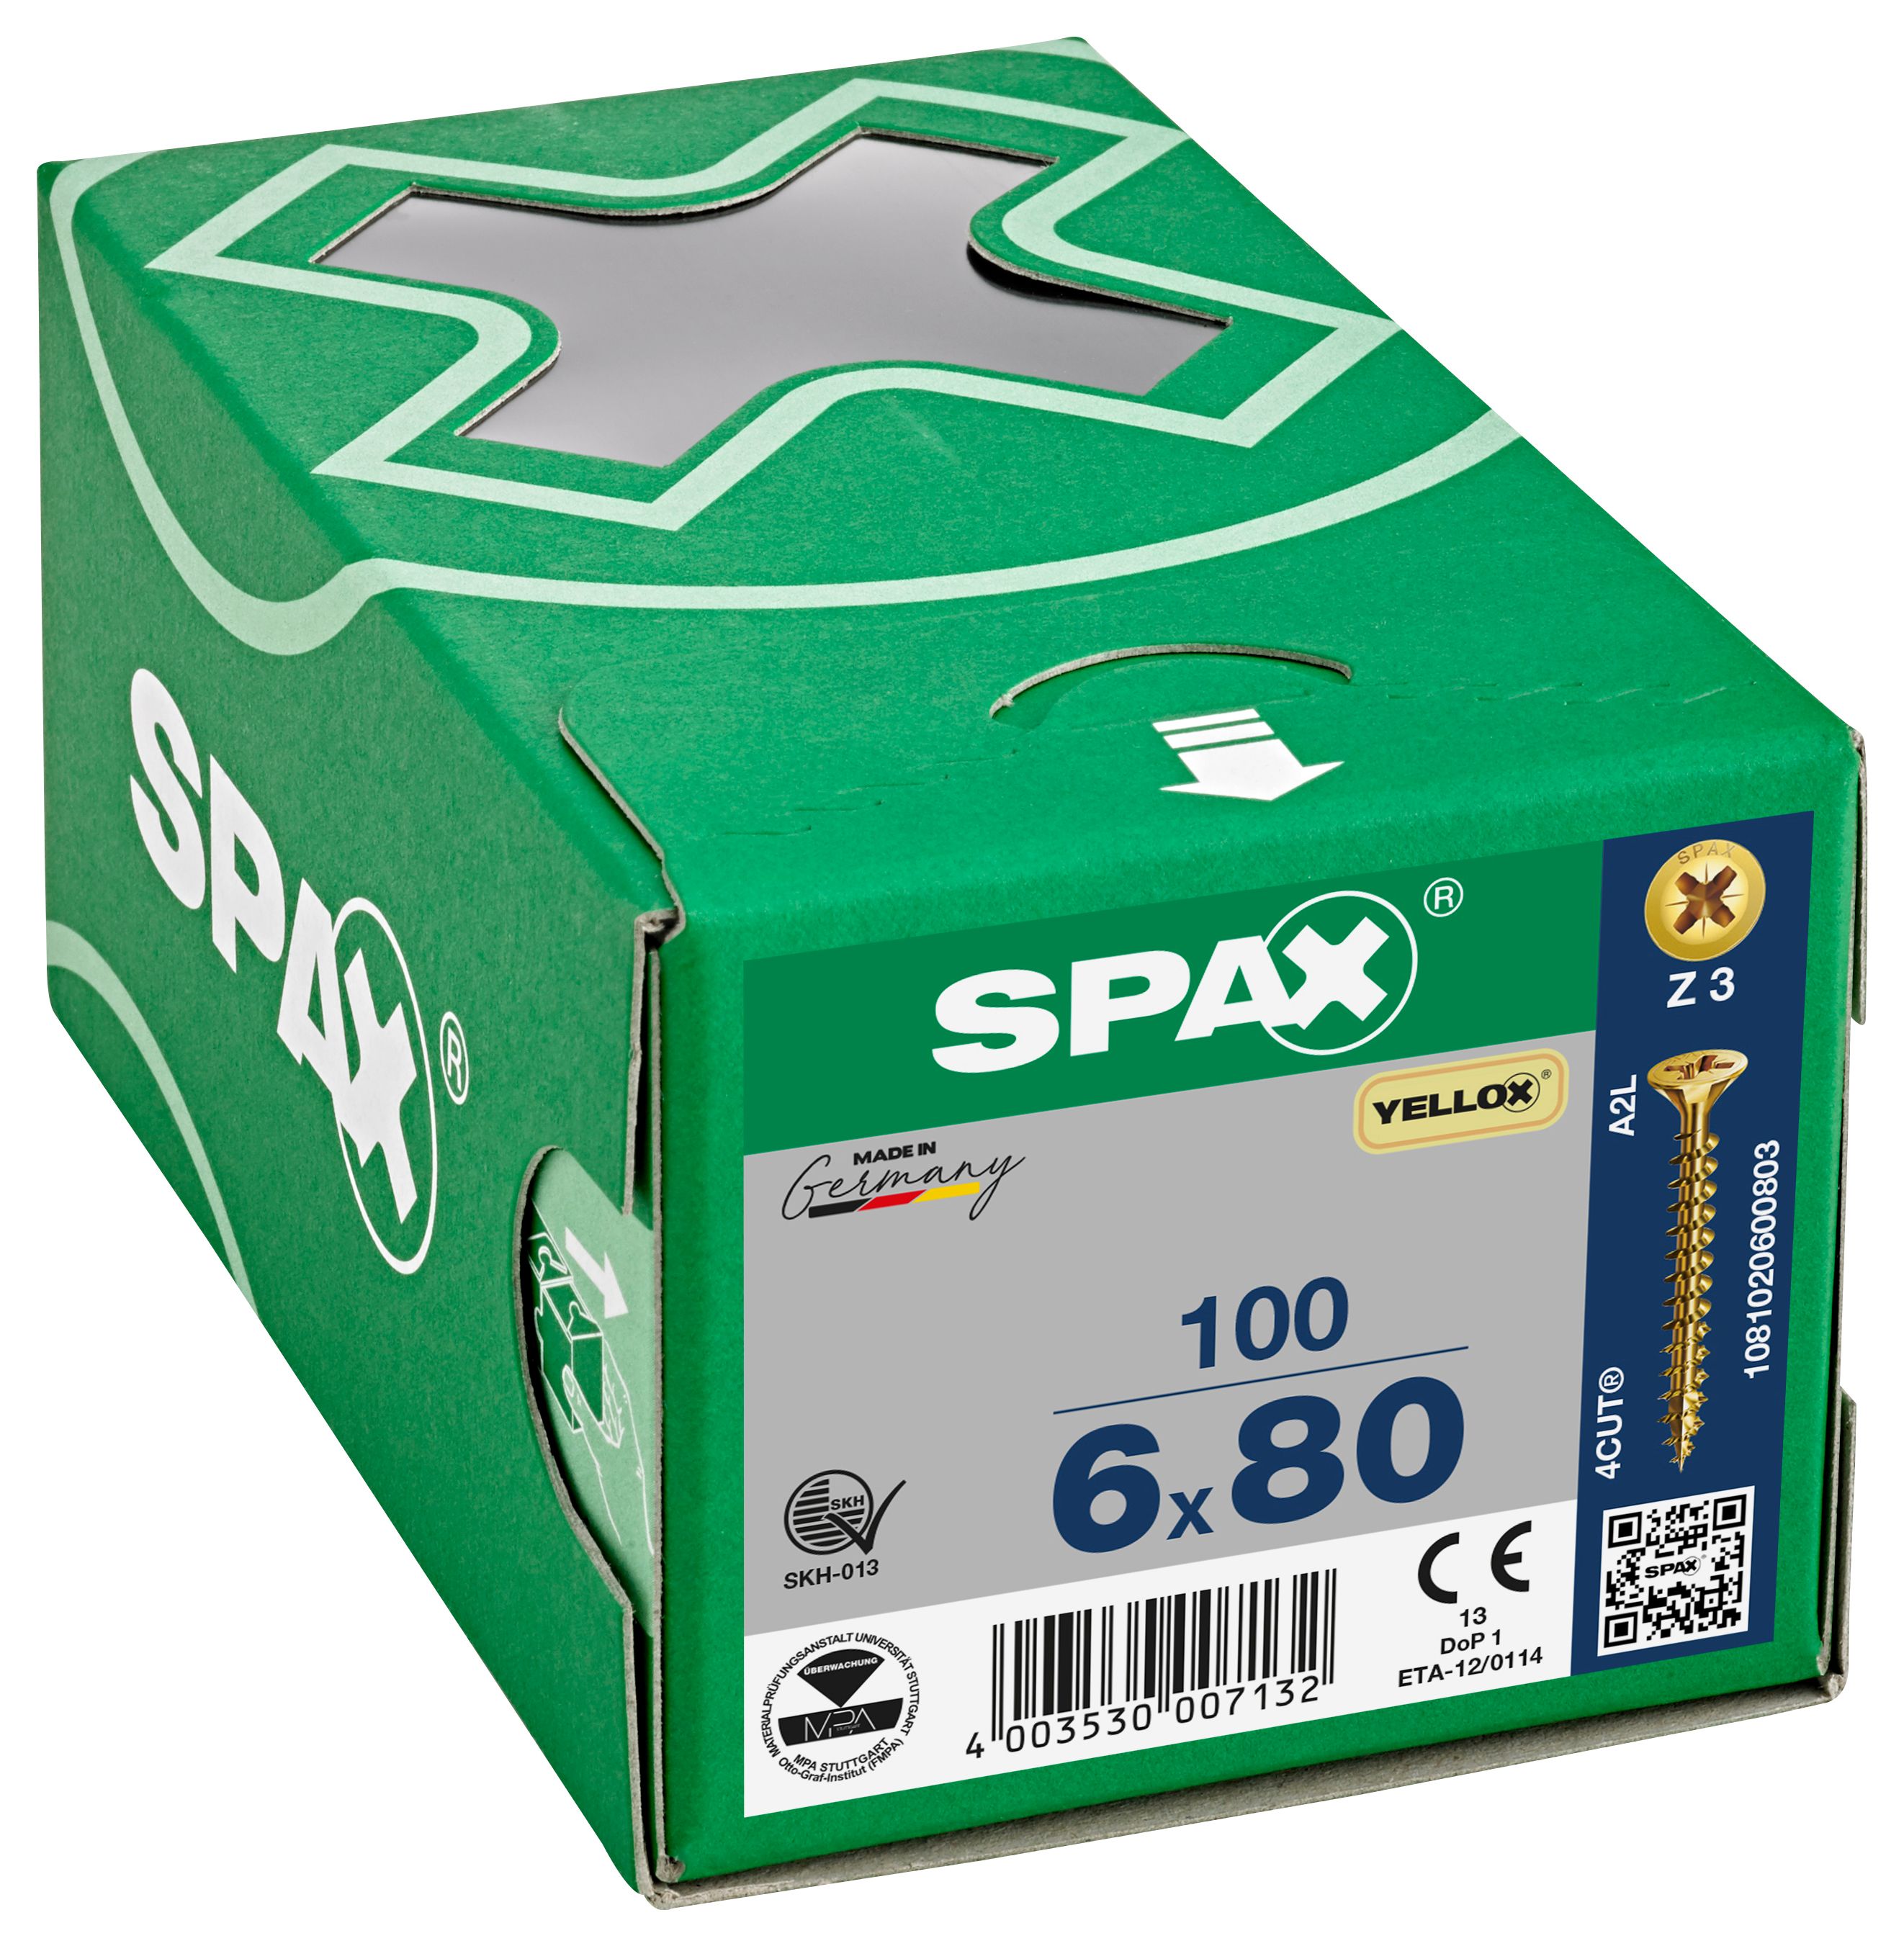 Image of Spax Pz Countersunk Yellox Screws - 6x80mm Pack Of 100